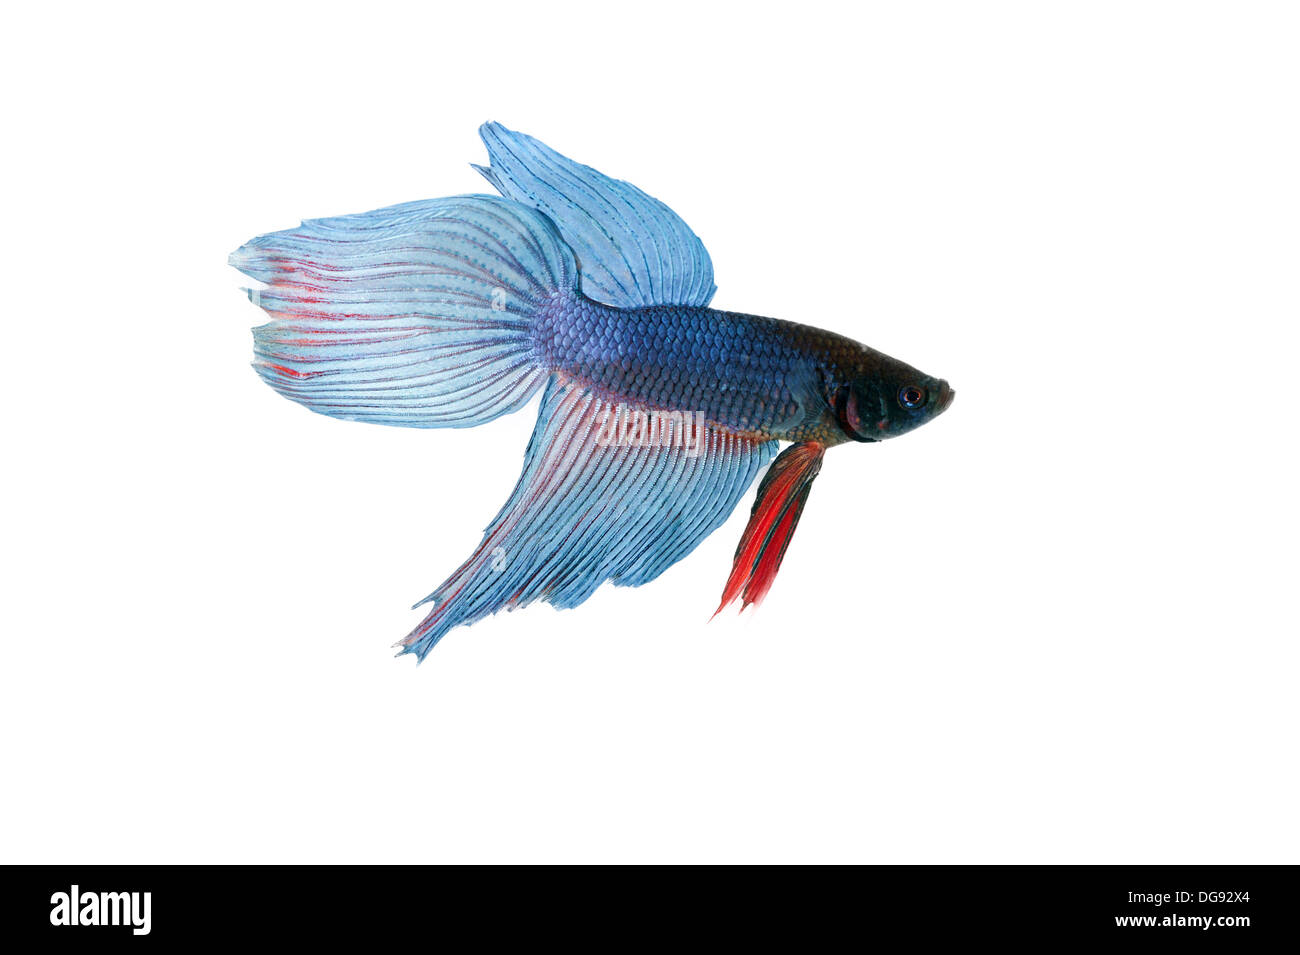 blue betta fish tank with isolated white background Stock Photo